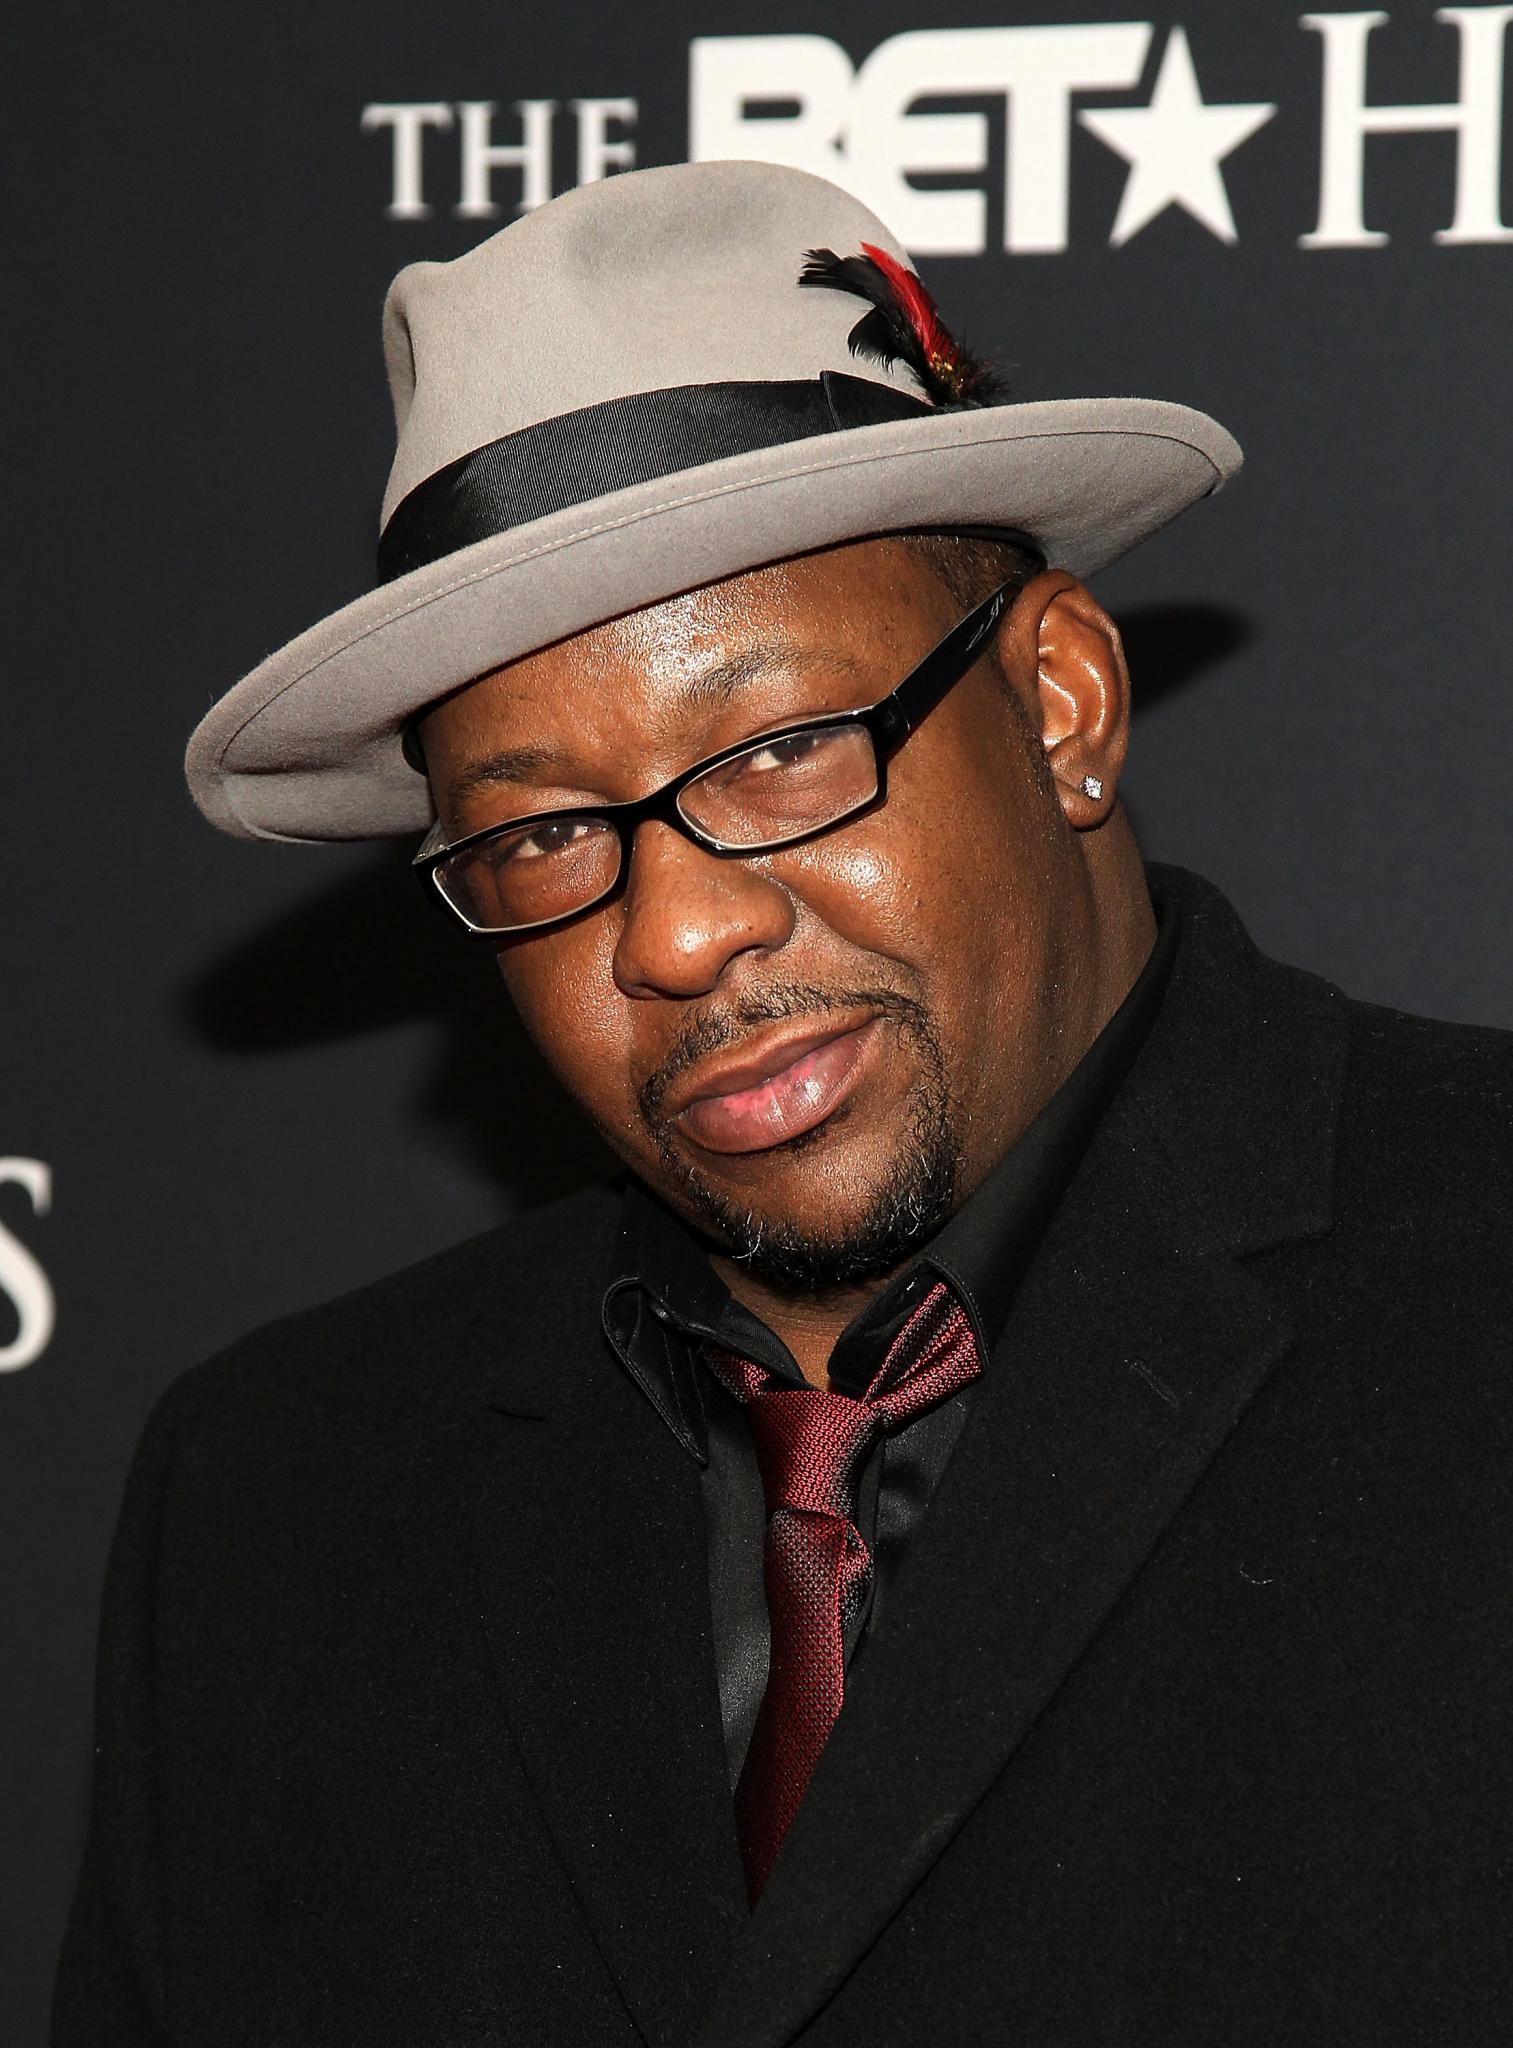 Is Bobby Brown Going Back on Tour?